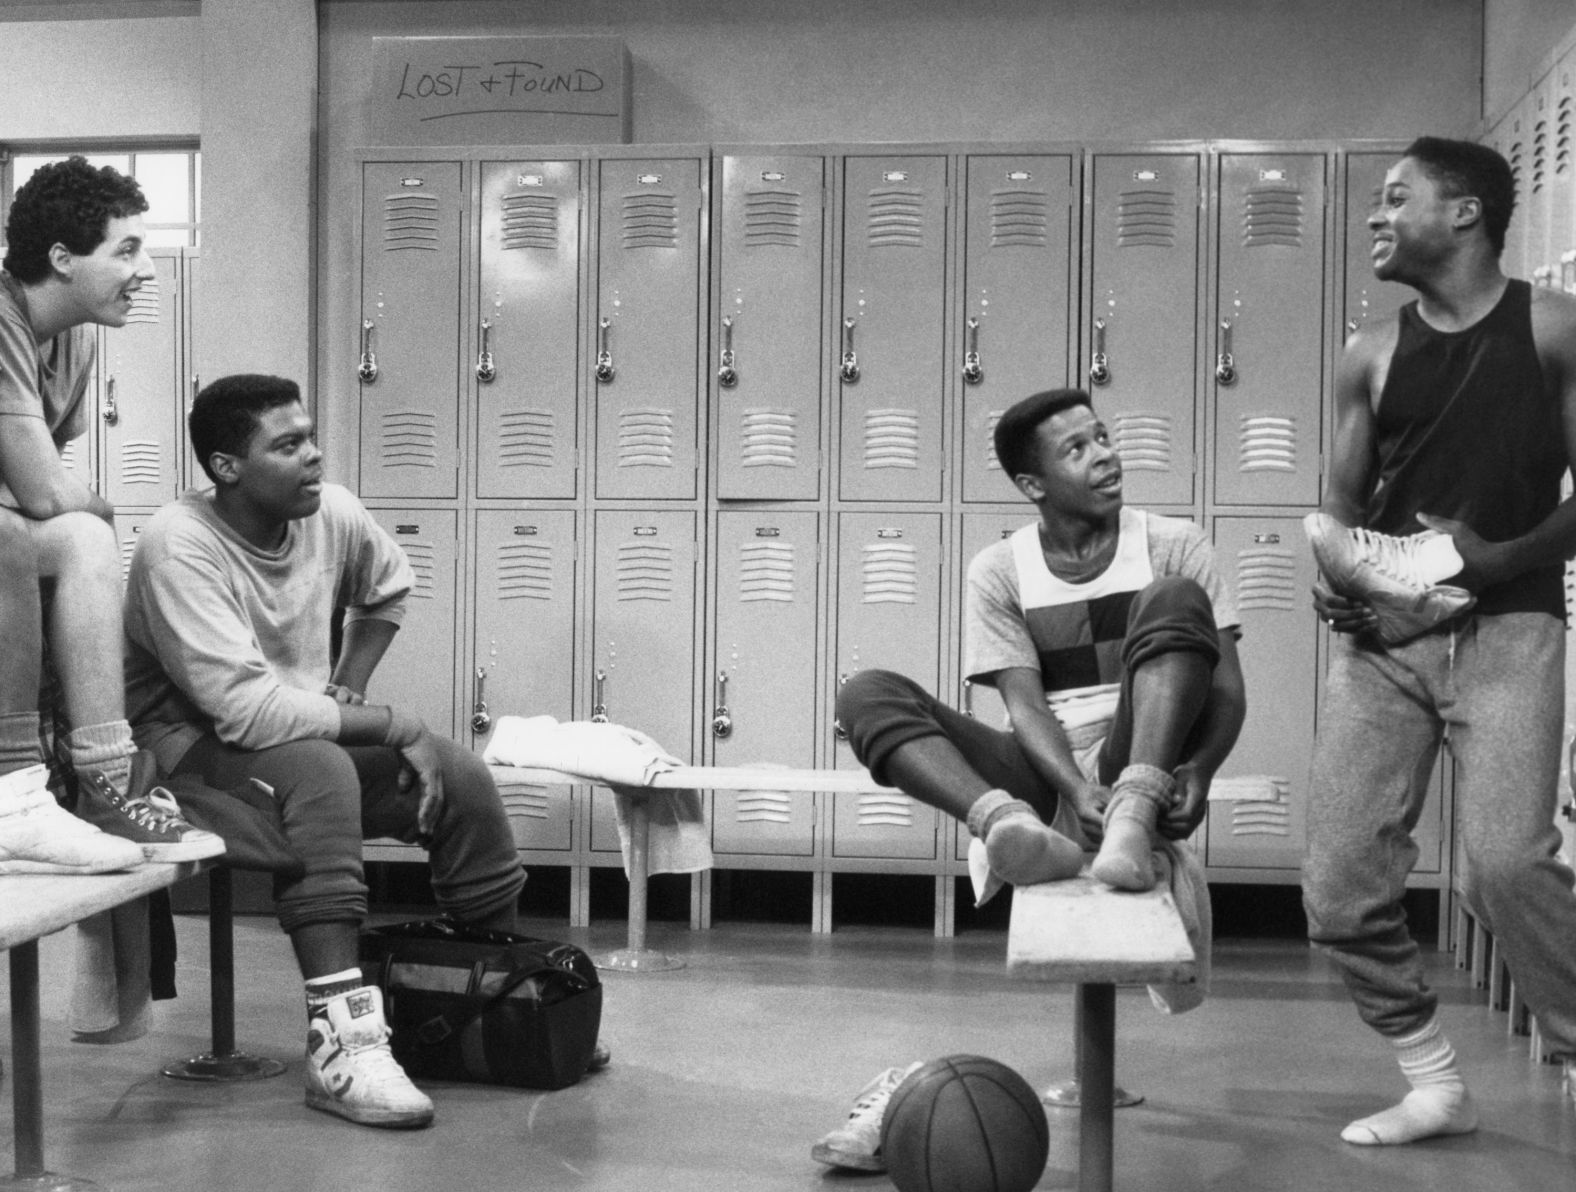 Sandler made his first television appearance in 1987, appearing on a few episodes of  "The Cosby Show" as a friend of the Huxtable family. With him in this scene, from left, are Troy Winbush, Dennis Singletary and Malcolm-Jamal Warner.